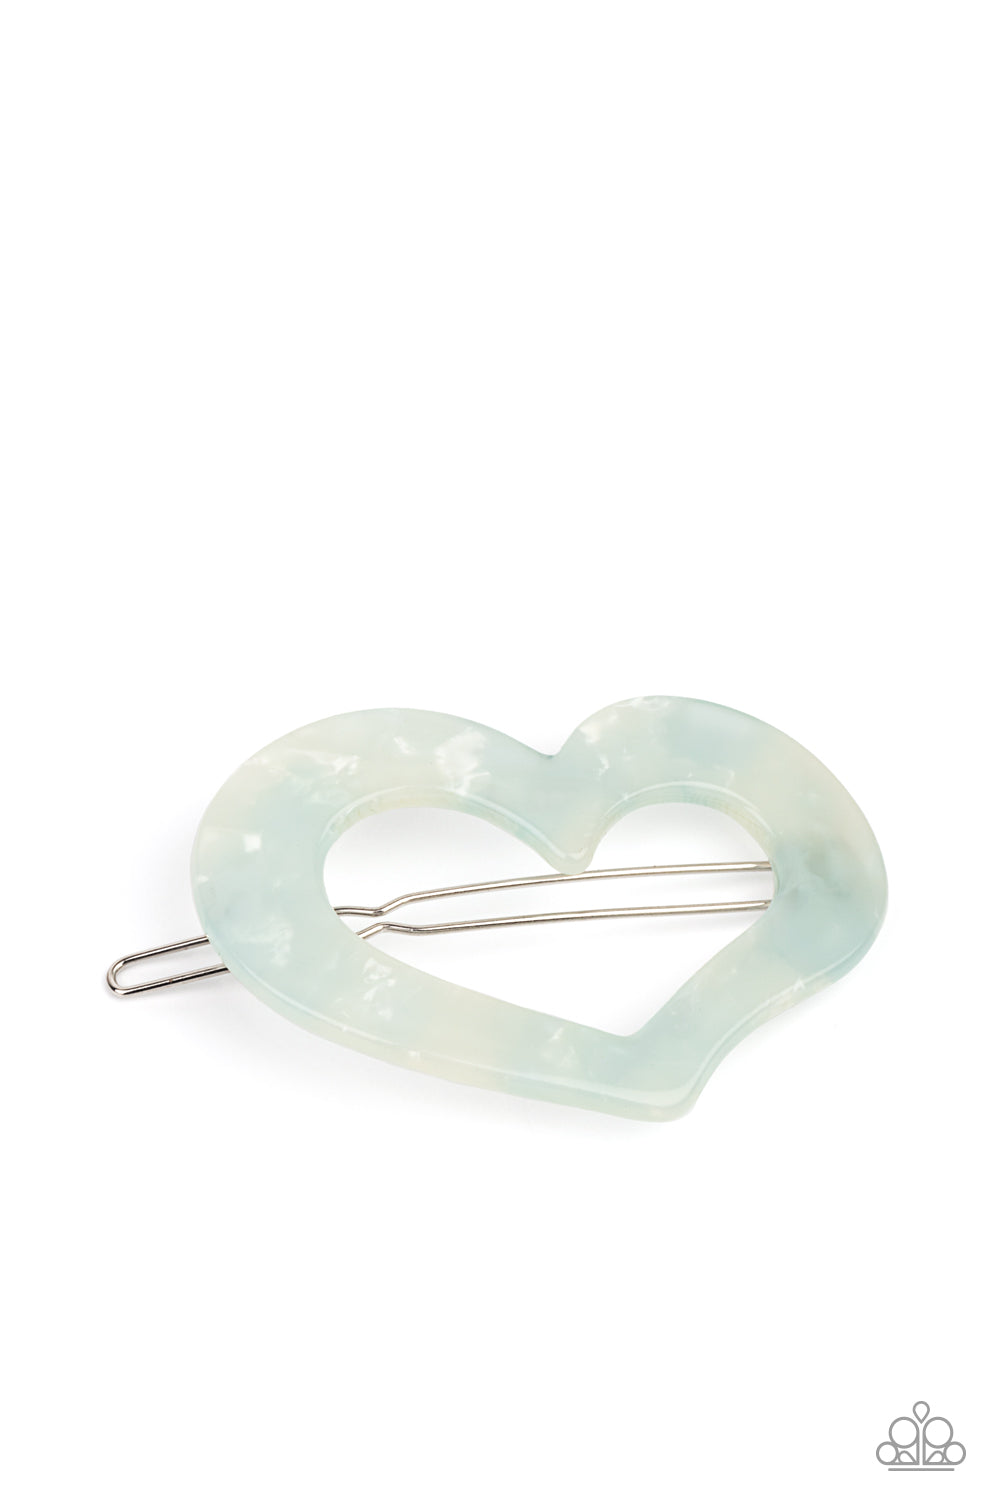 PRE-ORDER - Paparazzi HEART Not to Love - Blue Iridescent - Hair Clip - $5 Jewelry with Ashley Swint